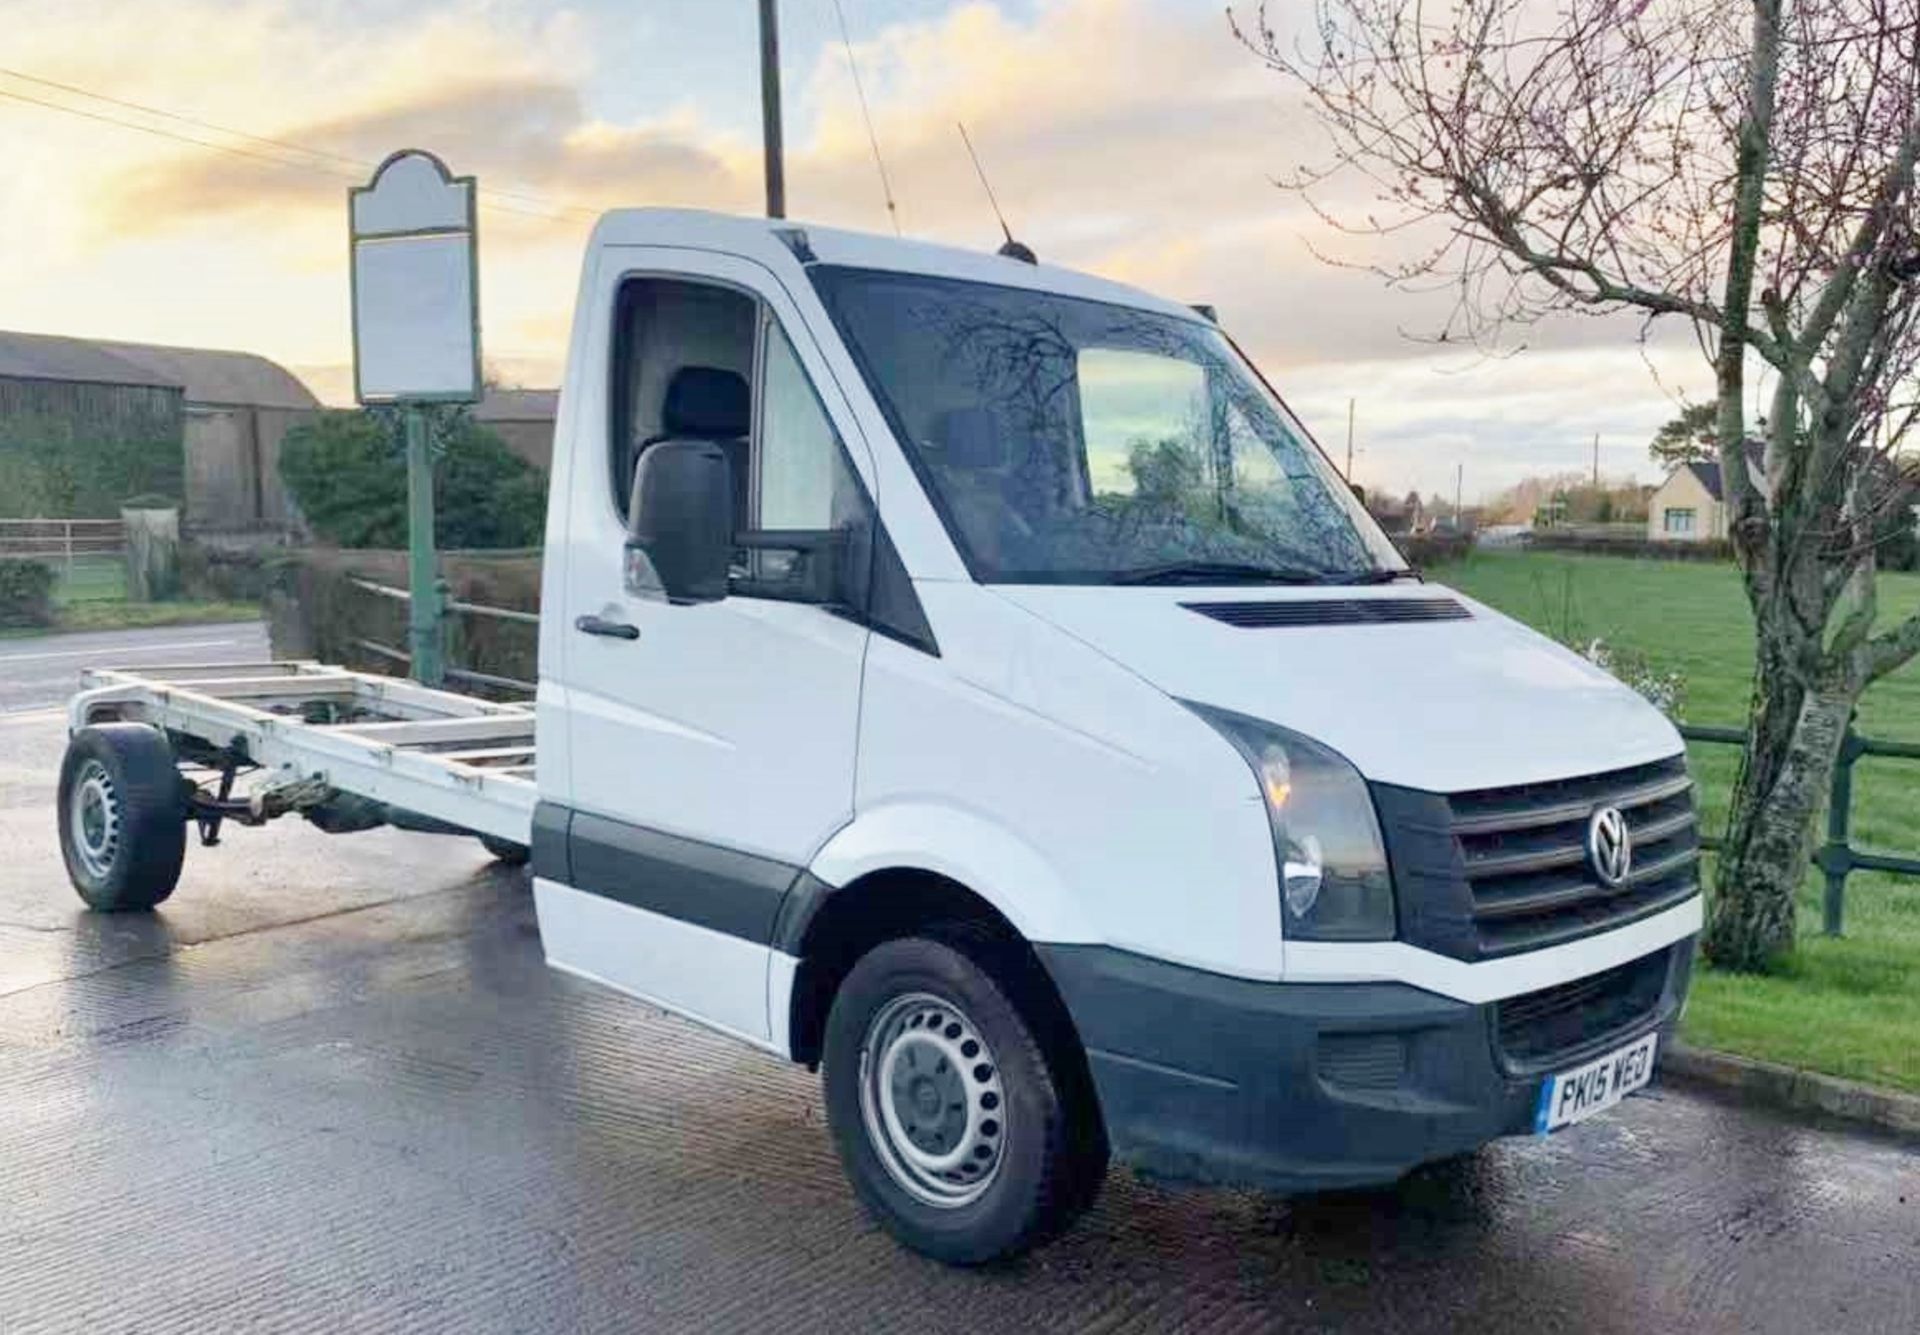 2015 (163 bhp) crafter chassis cab